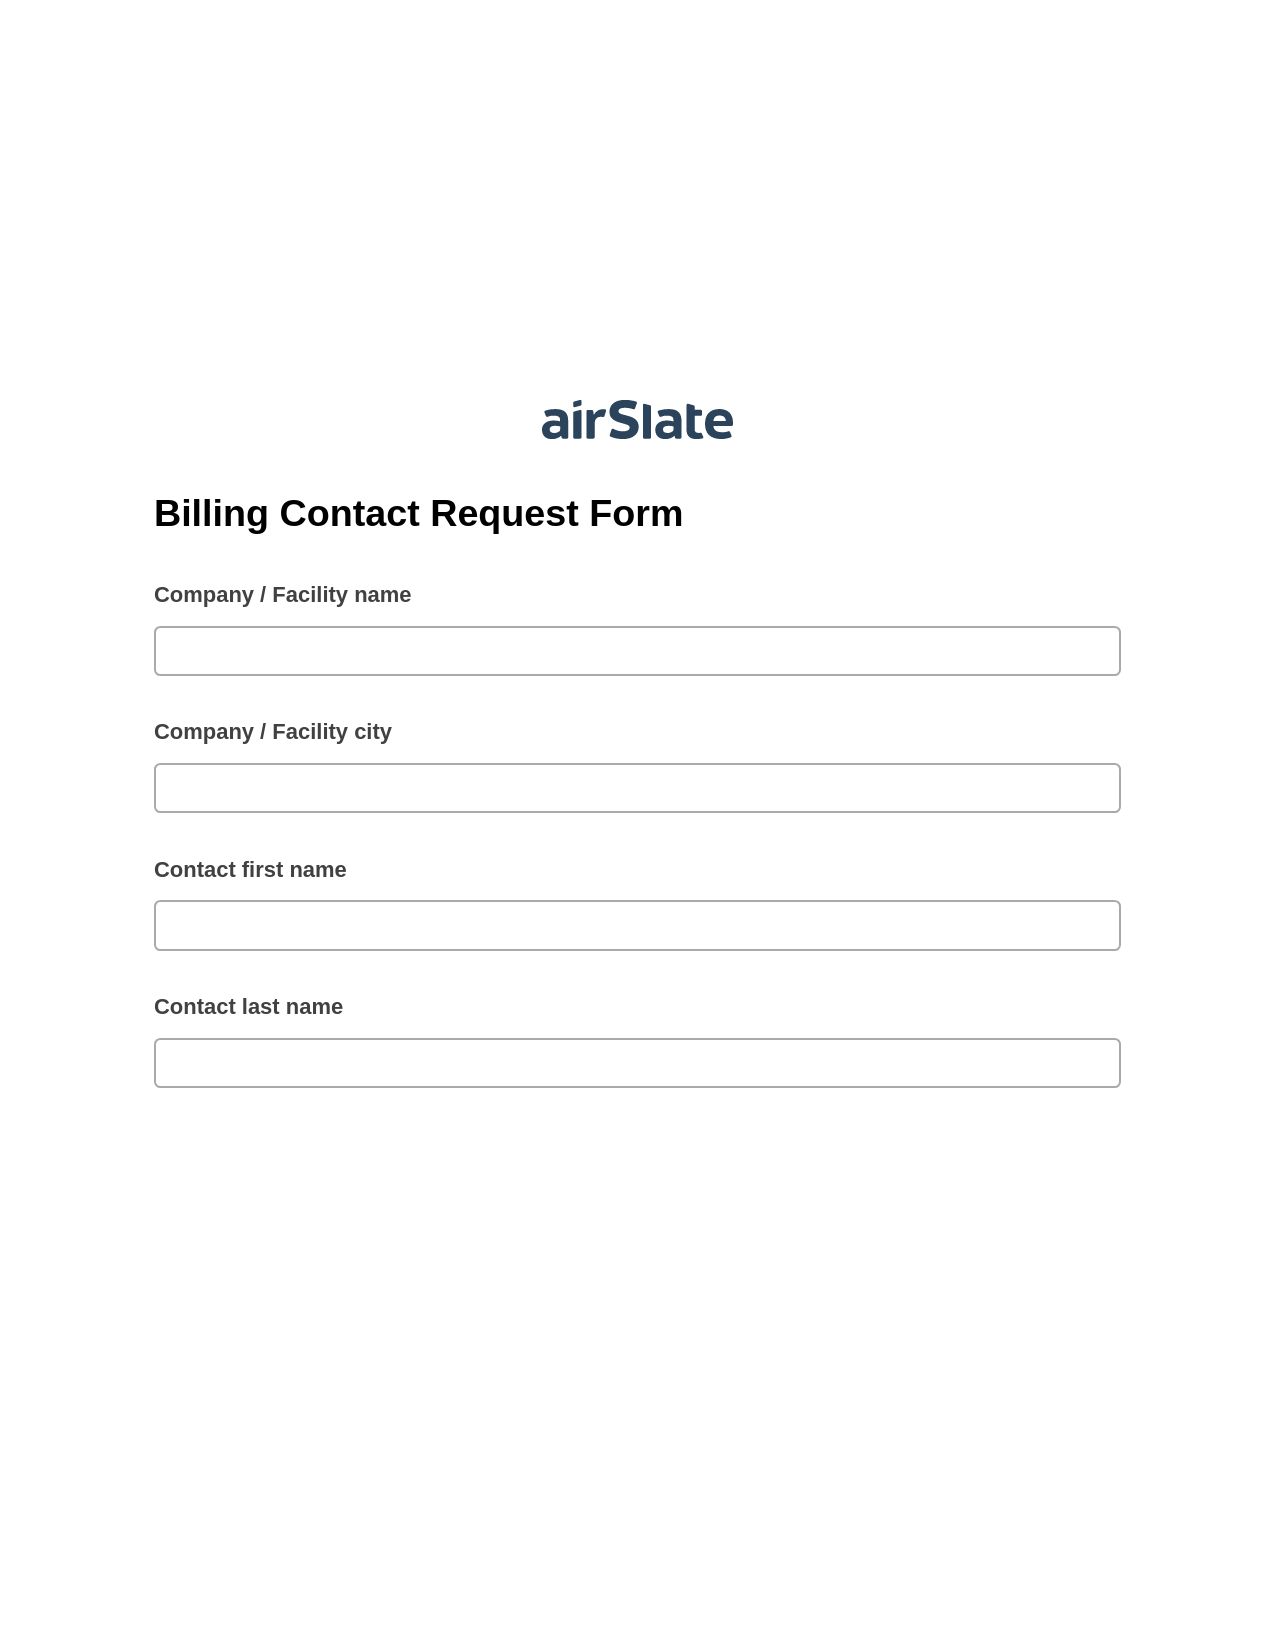 Multirole Billing Contact Request Form Pre-fill Dropdown from Airtable, Google Cloud Print Bot, Export to Excel 365 Bot